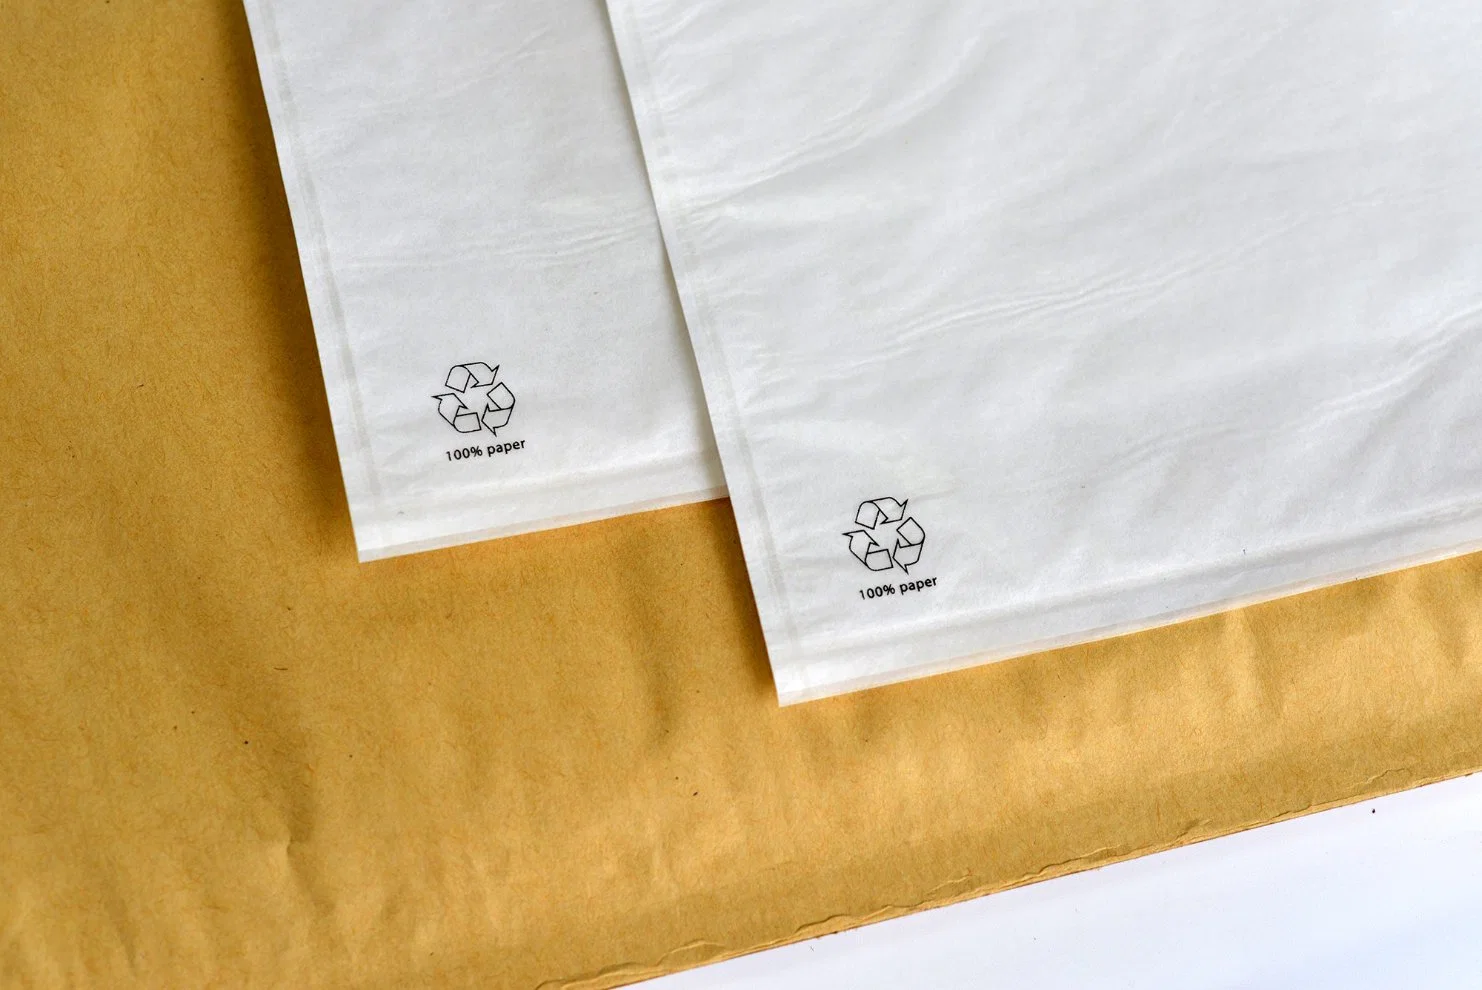 Plain Packing List Pouch Envelopes Back Self-Adhesive Shipping Document 100% Recycled Paper A4 Size